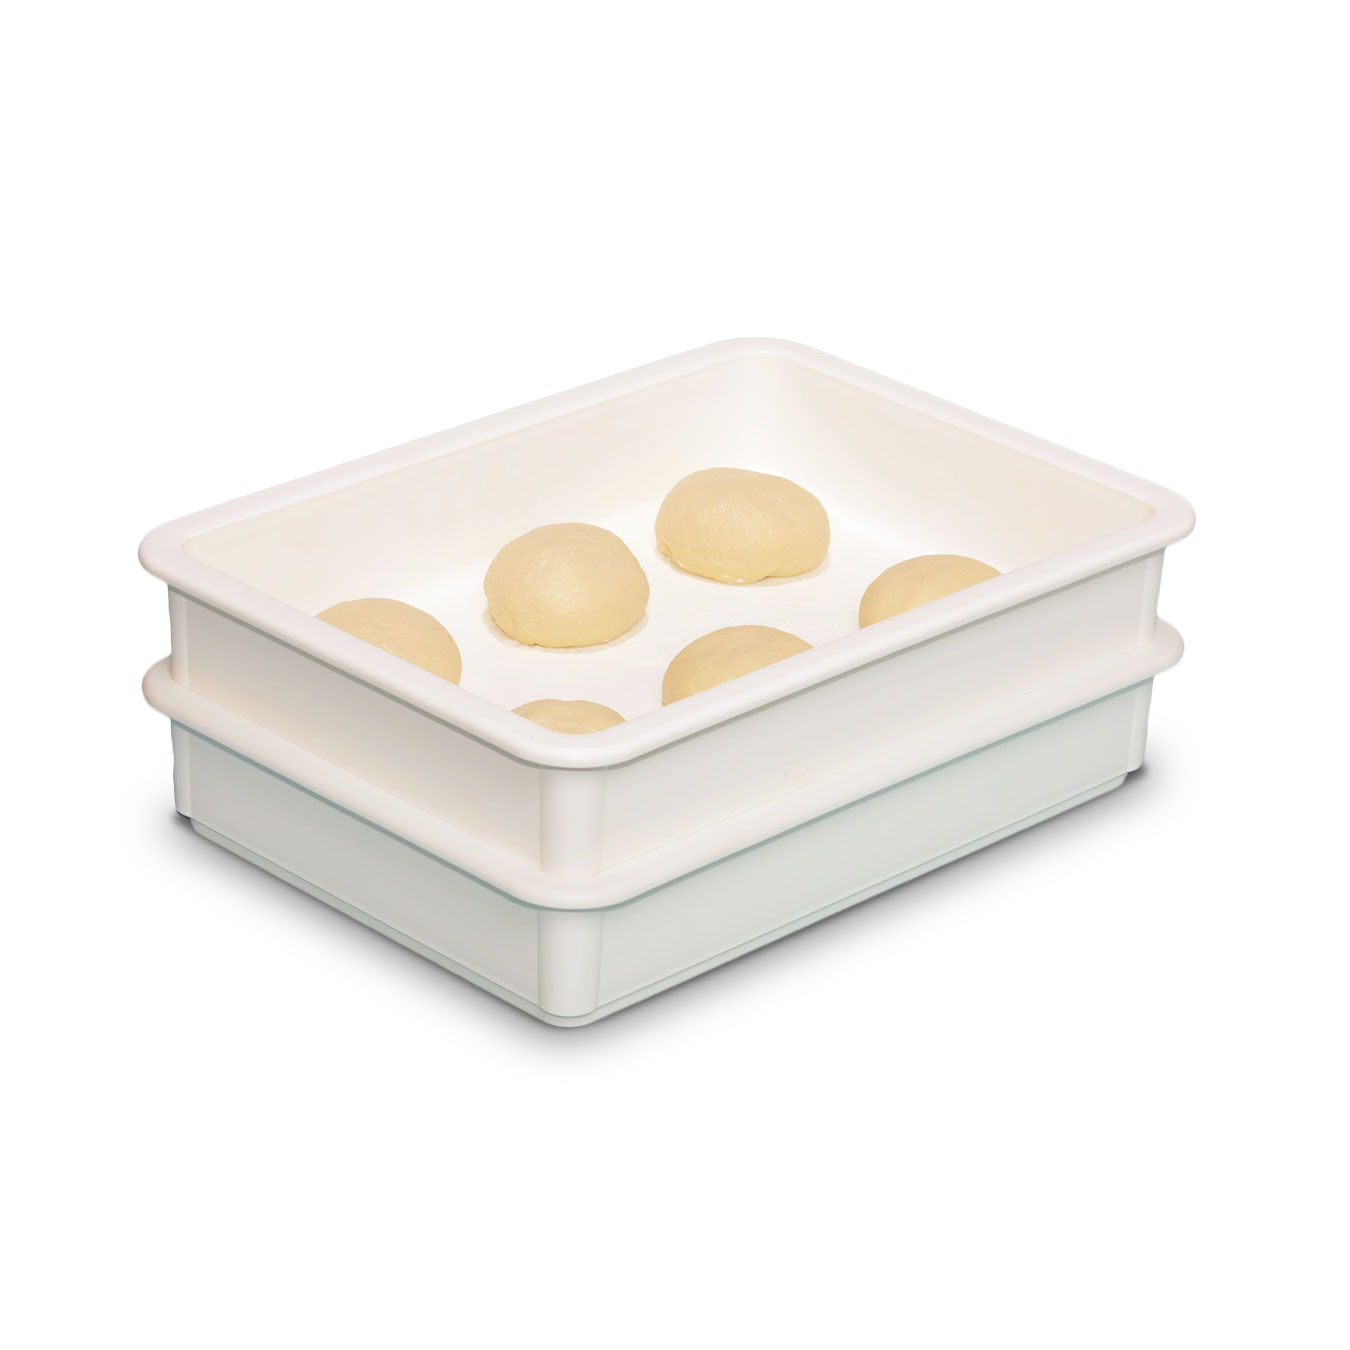 Dough Trays, Pans for Pizza Dough Proofing & Storage